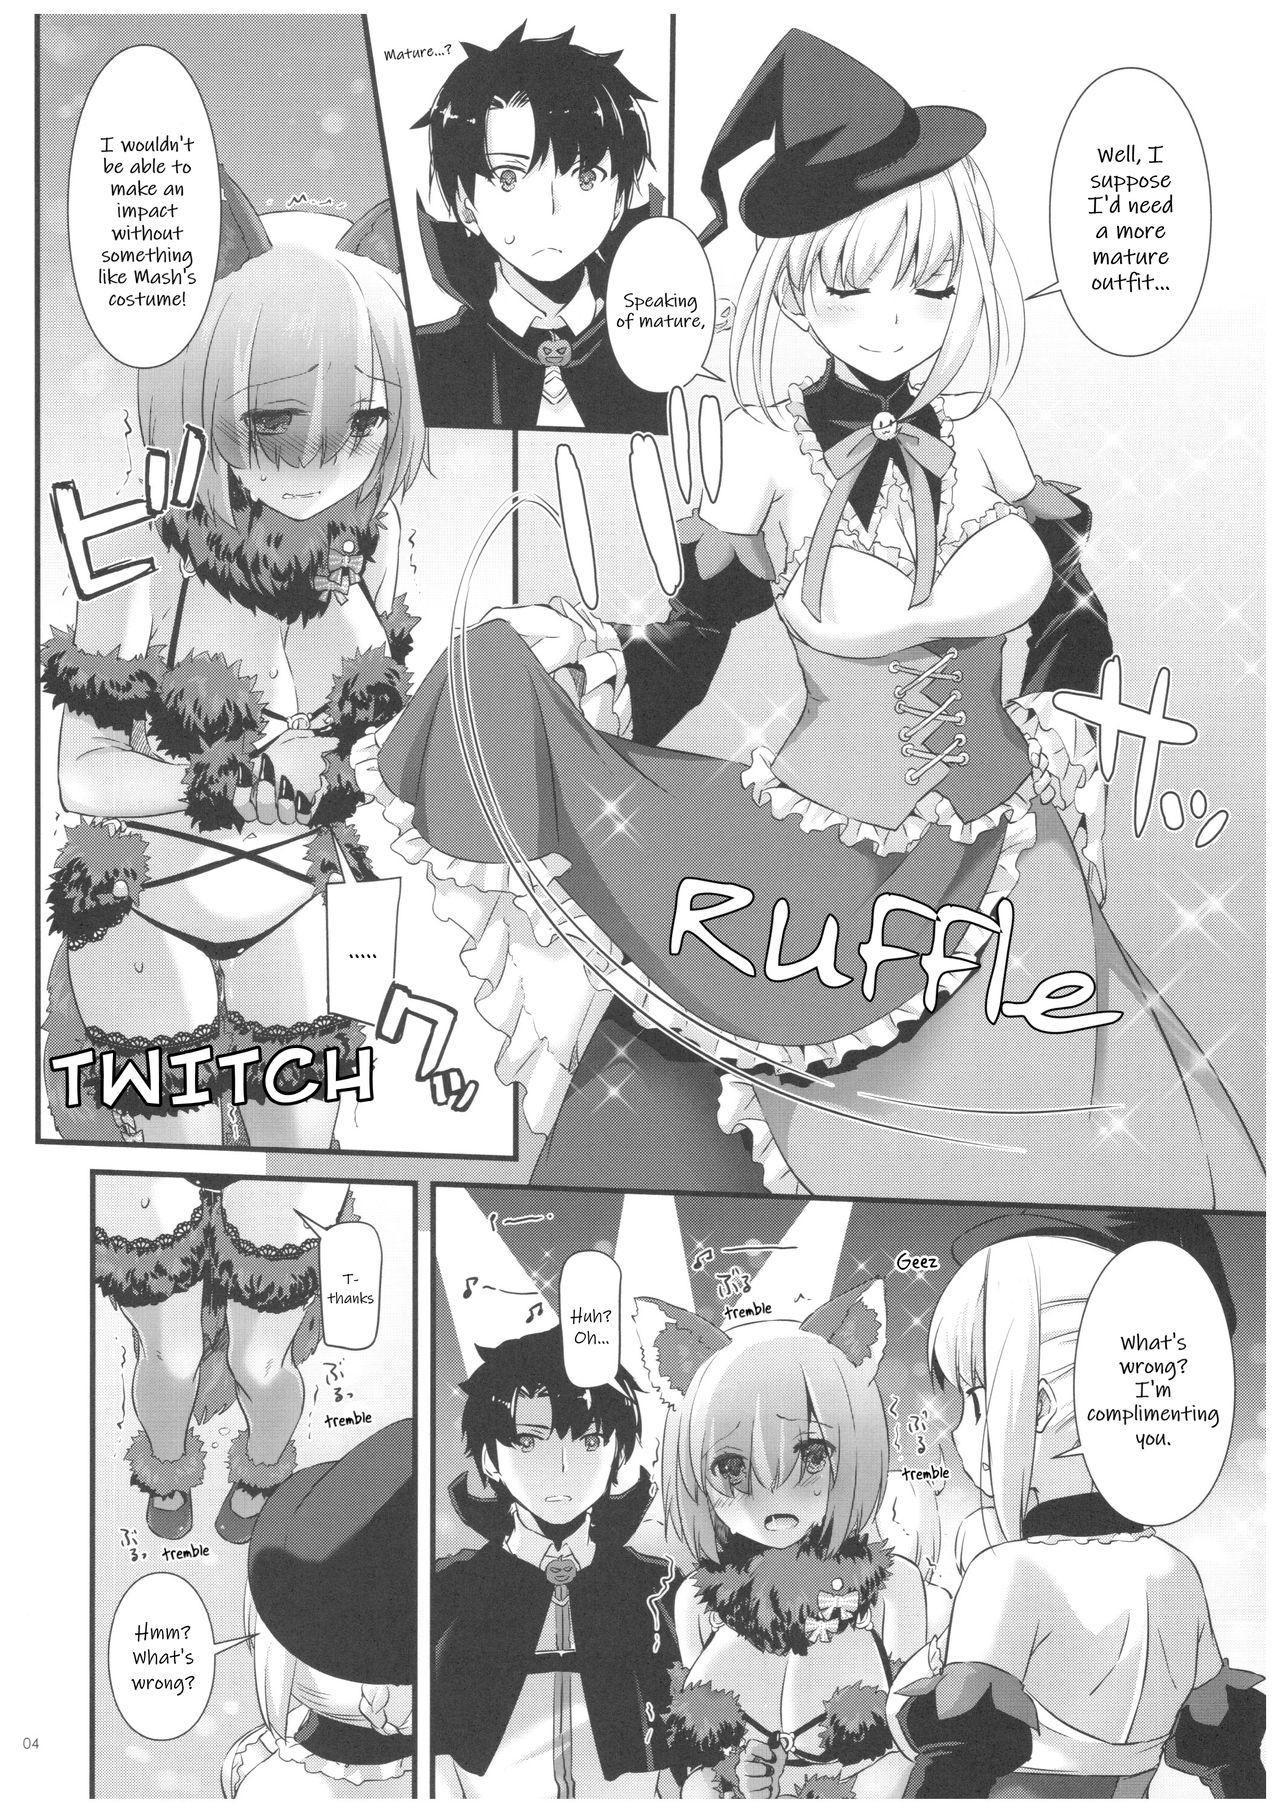 Scandal D.L. action 118 - Fate grand order Sextoys - Page 4